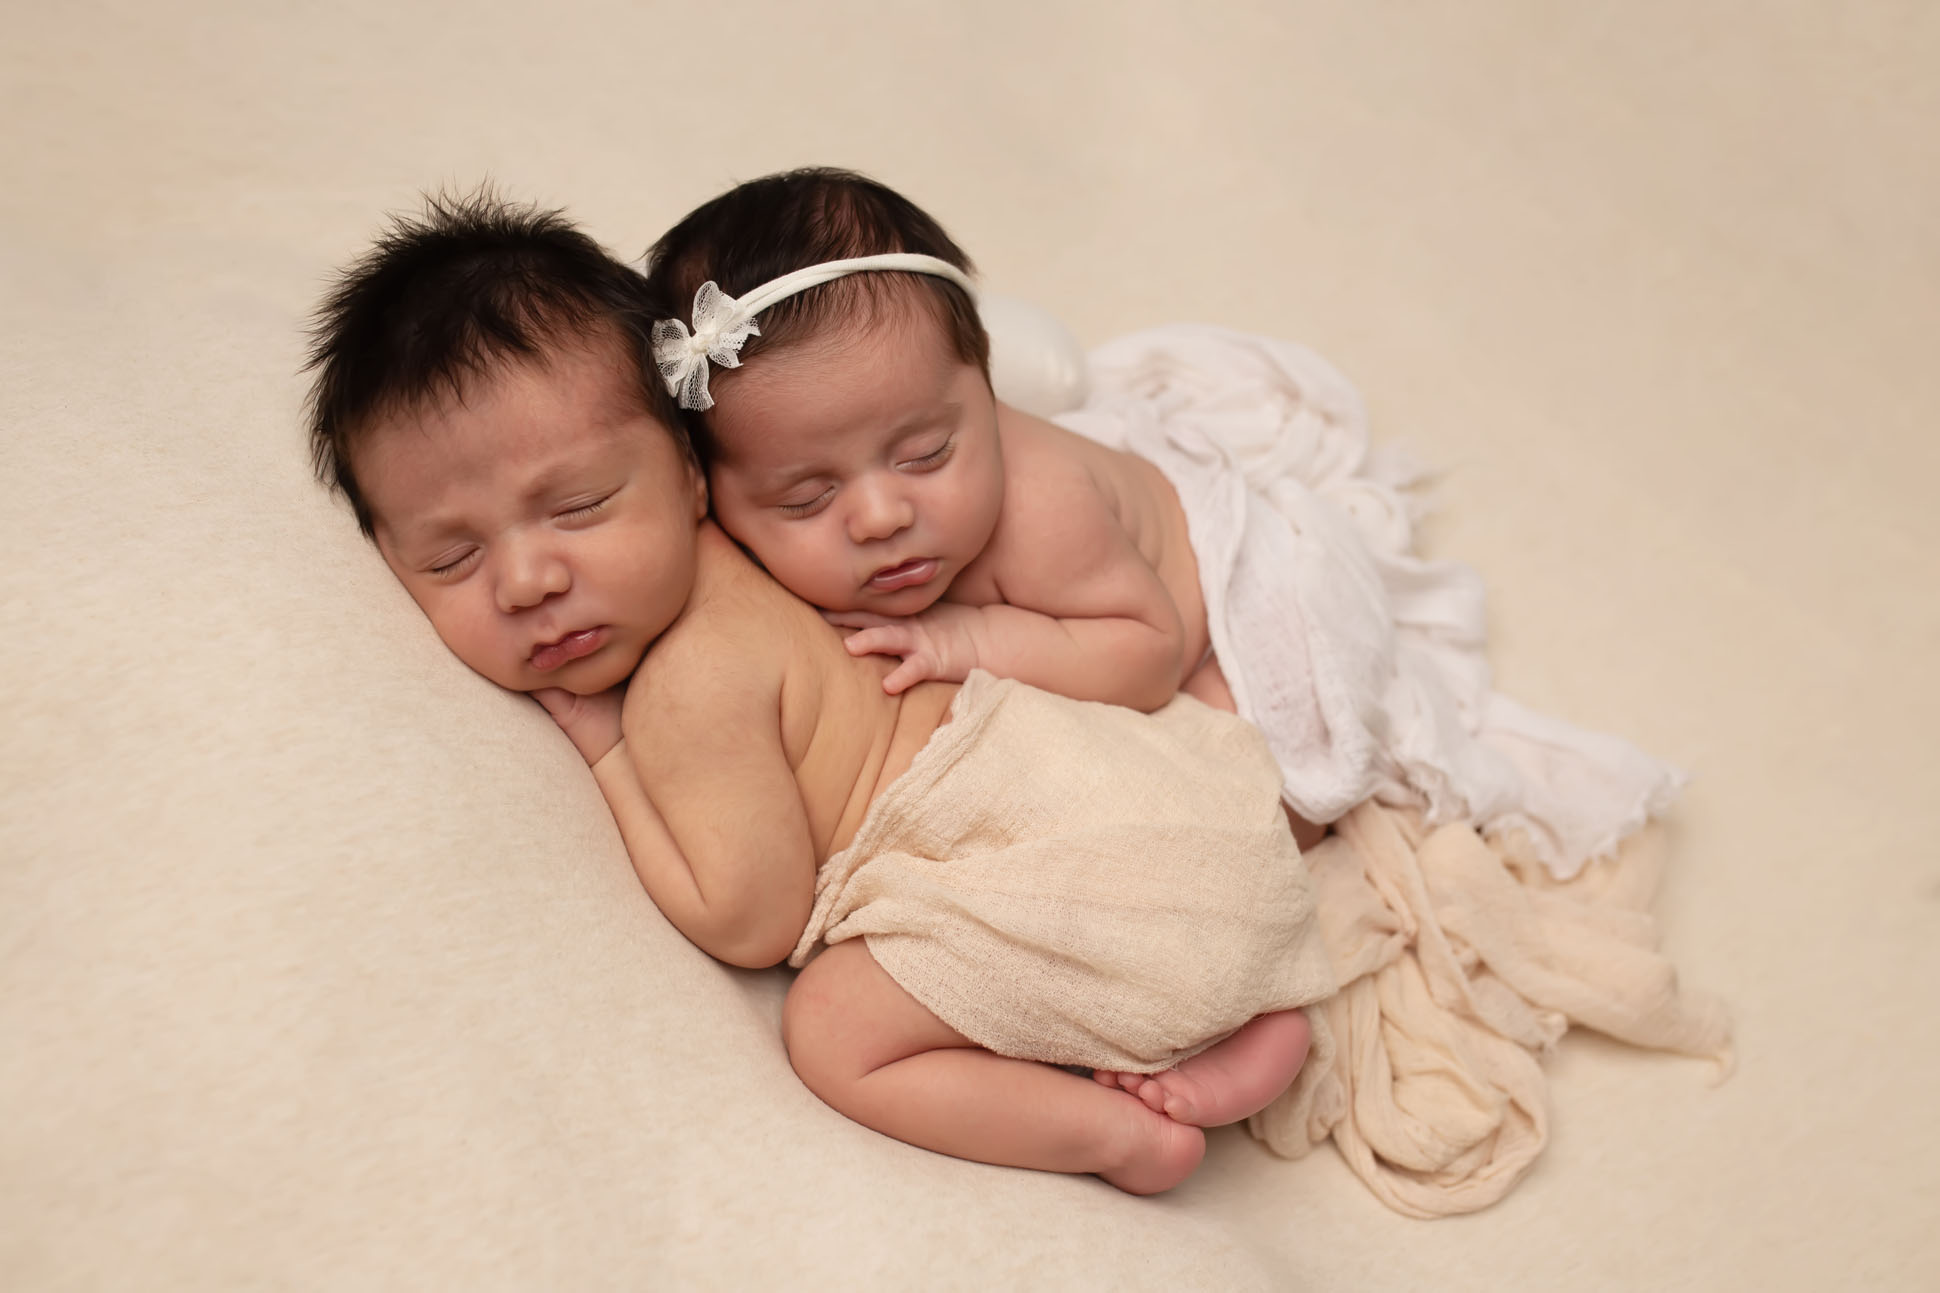 Identical twins have babies two days apart one boy and one girl pictured laying together photographed by Dallas Photographer Mod L Photography Laura Levitan